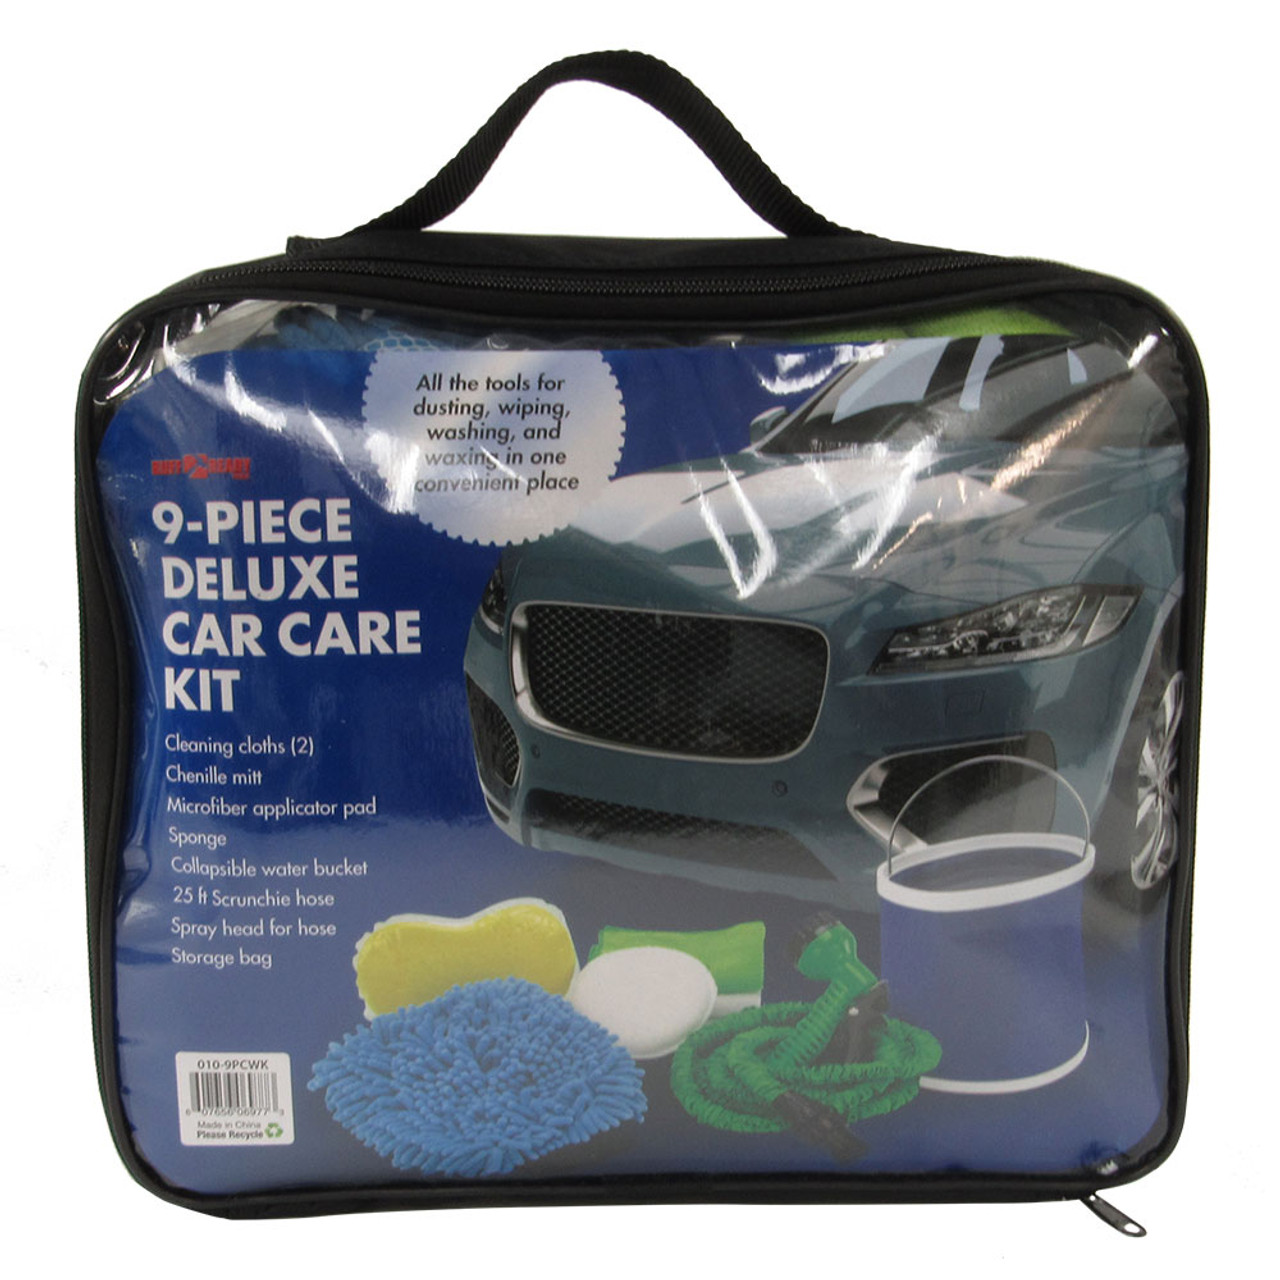 Deluxe 9-Piece Car Care Kit